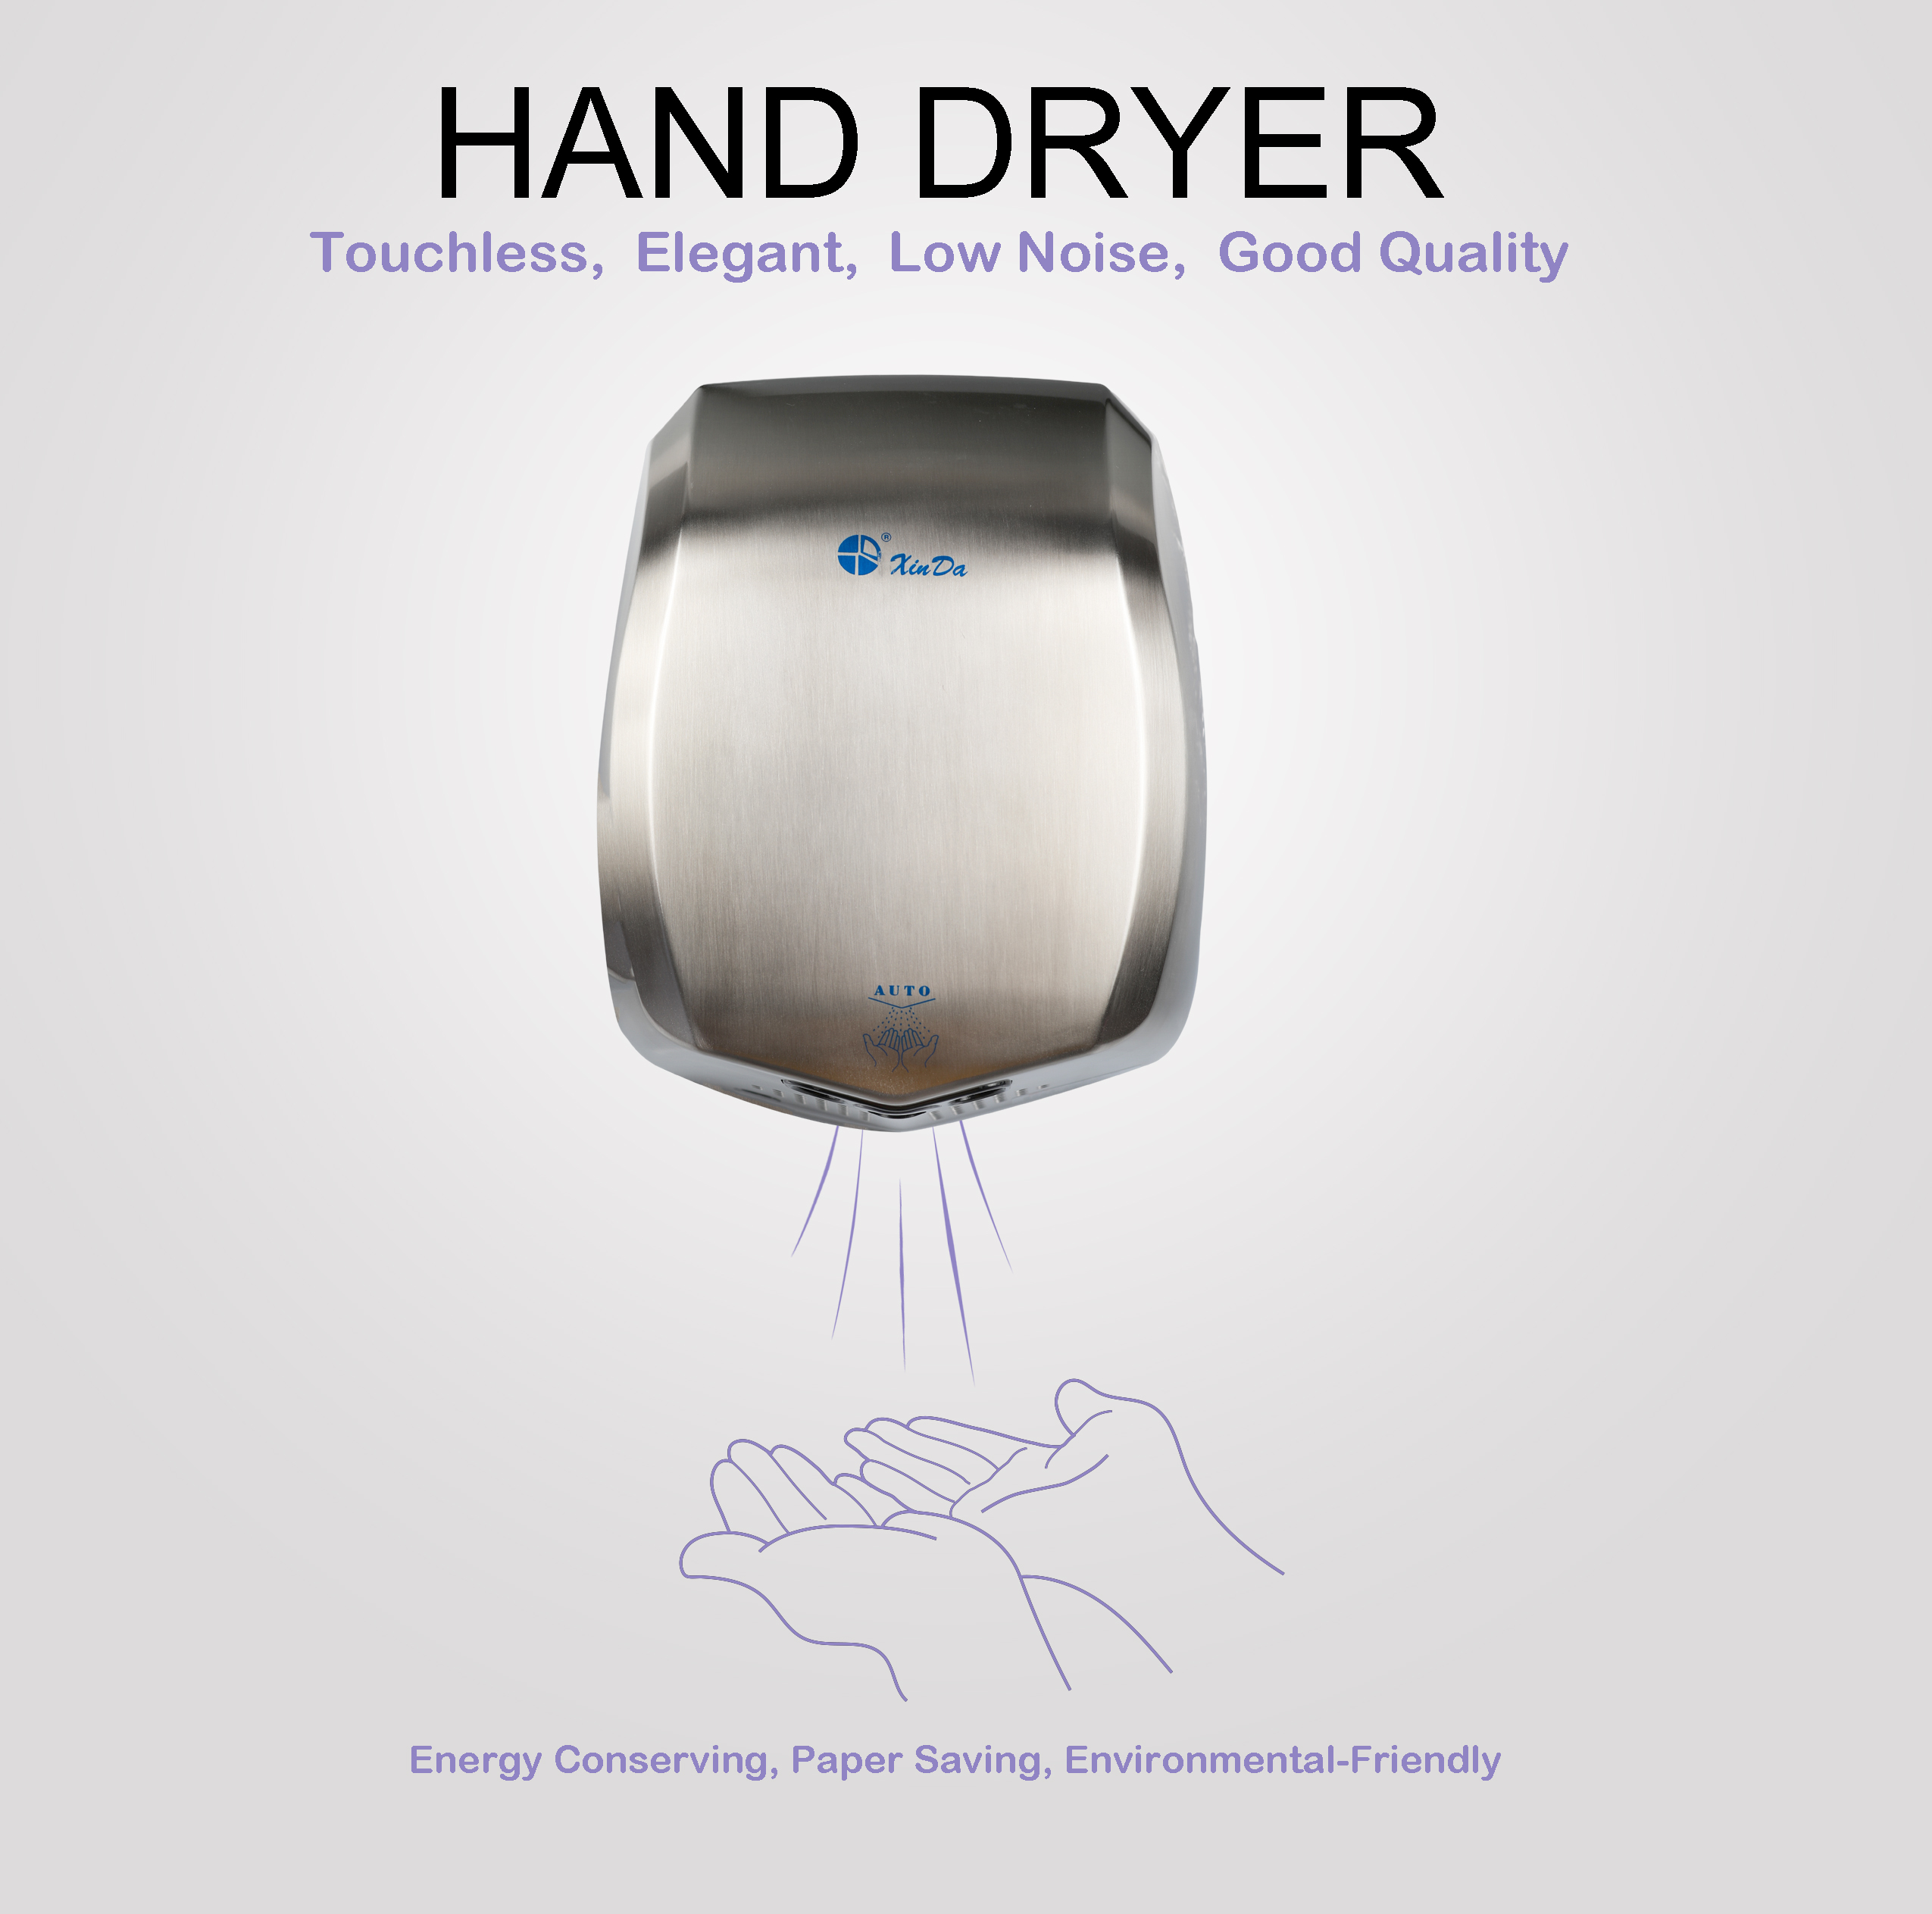 Benefits of an Automatic Hand Dryer